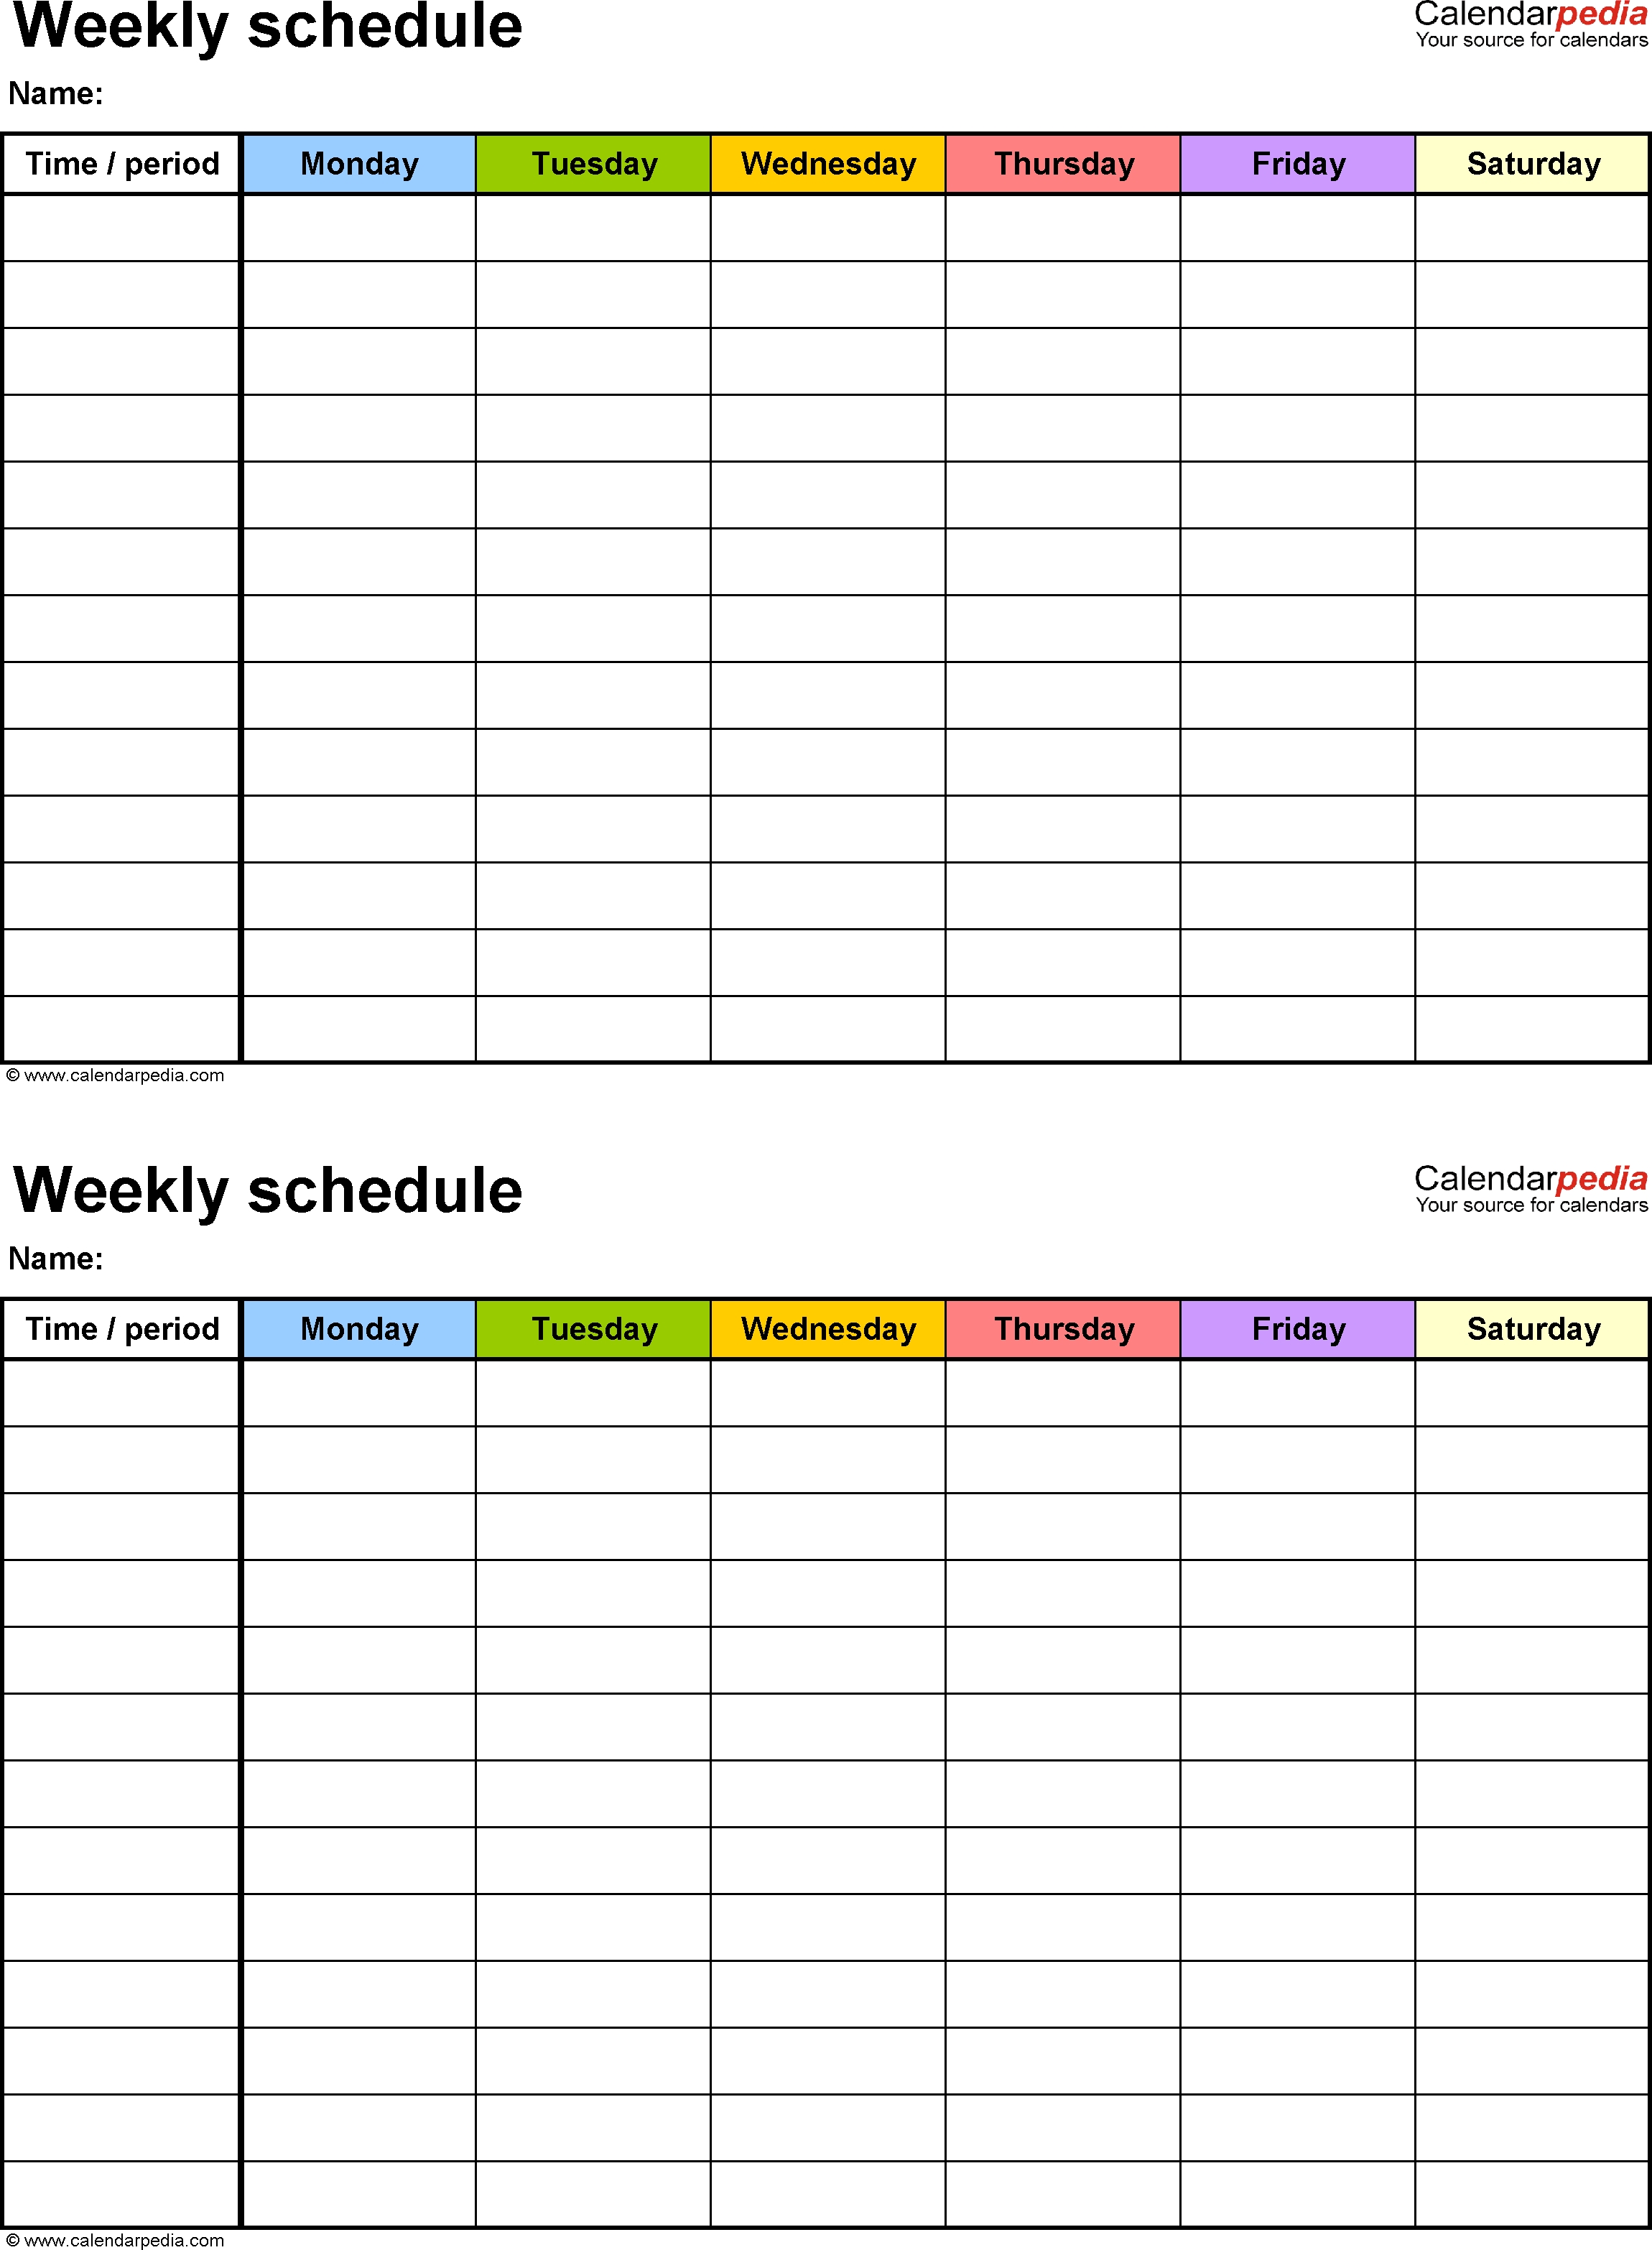 Free Weekly Schedule Templates For Word - 18 Templates  Printable Weekly Planner For The Week